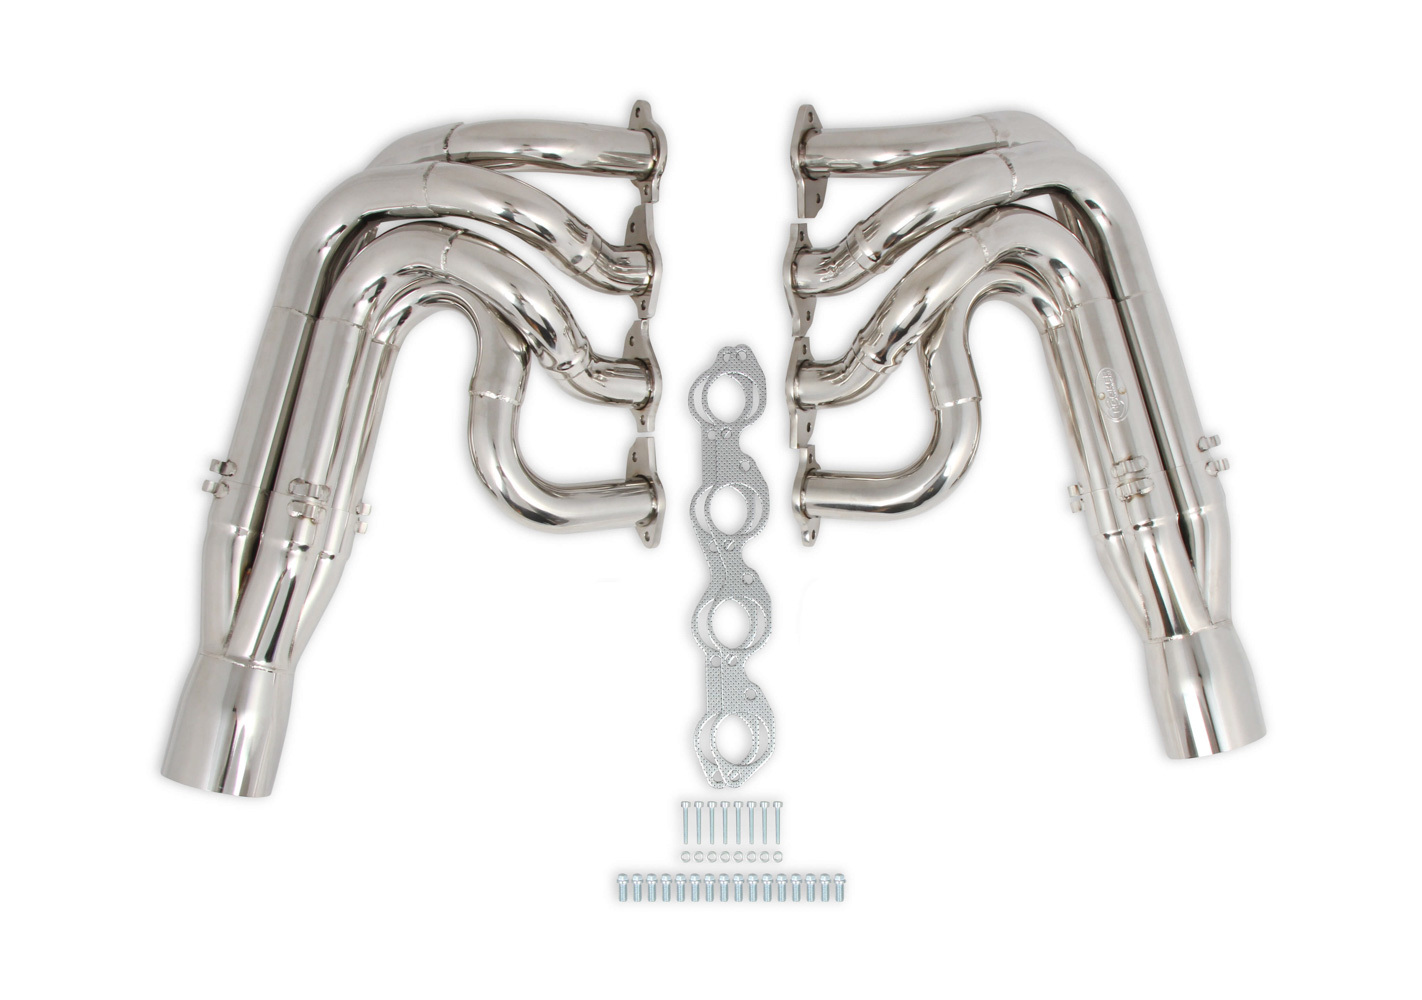 Hooker Headers 2502-2HKR - Headers, Racingheart, 3-Step, 2-1/8 to 2-1/4 to 2-3/8 in Primary, 4-1/2 in Collector, Stainless, Polished, Big Block Chevy, Kit